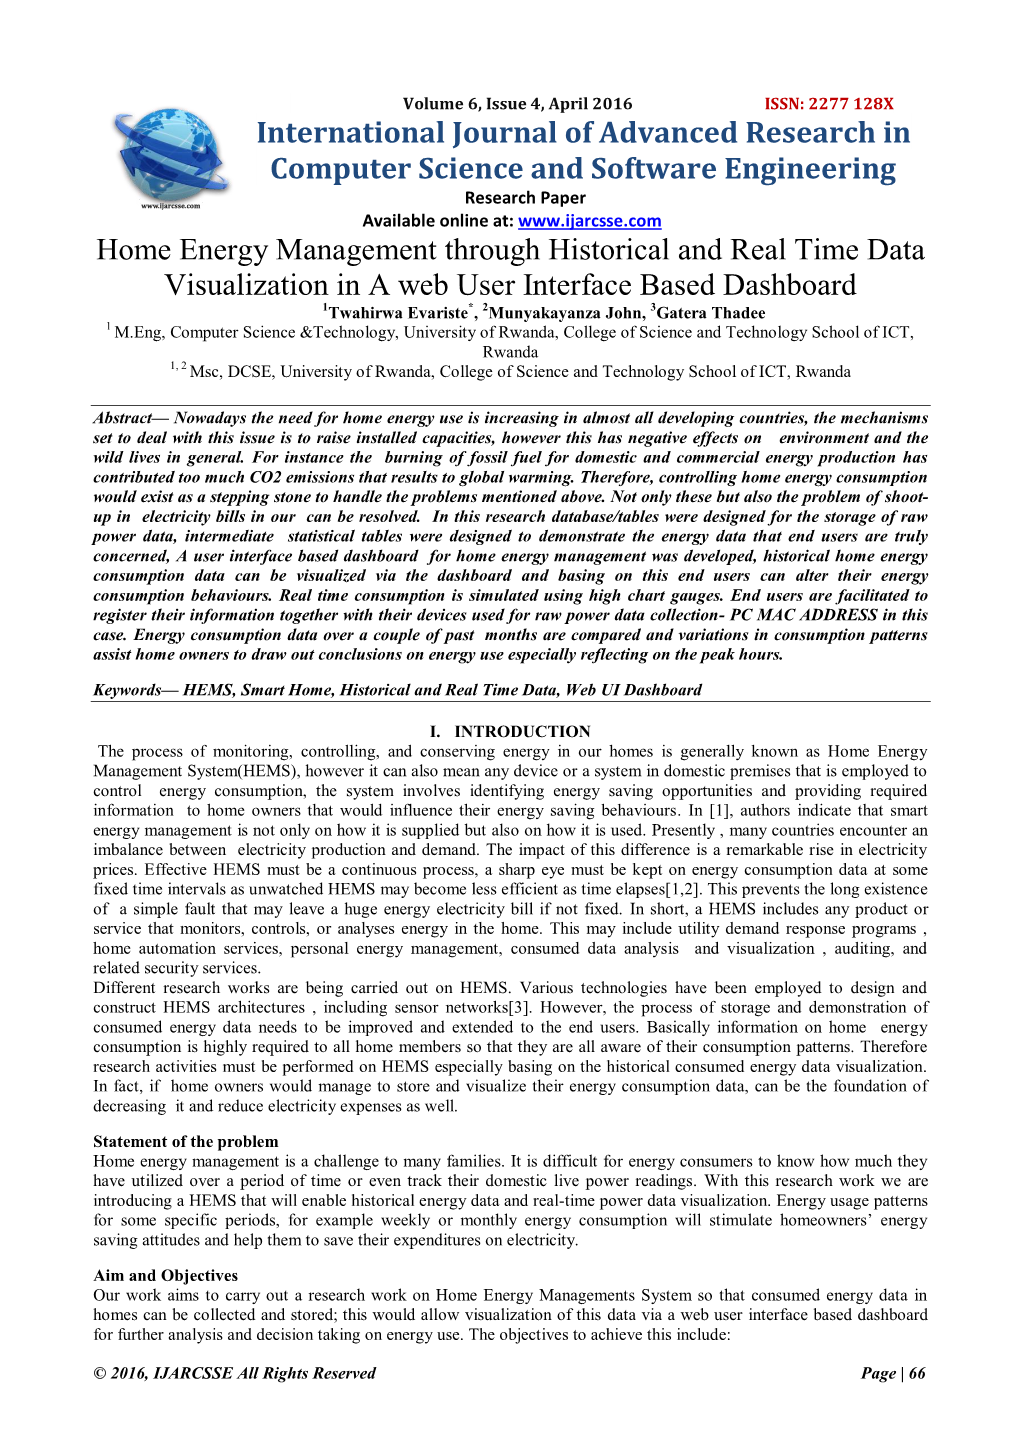 Home Energy Management Through Historical and Real Time Data